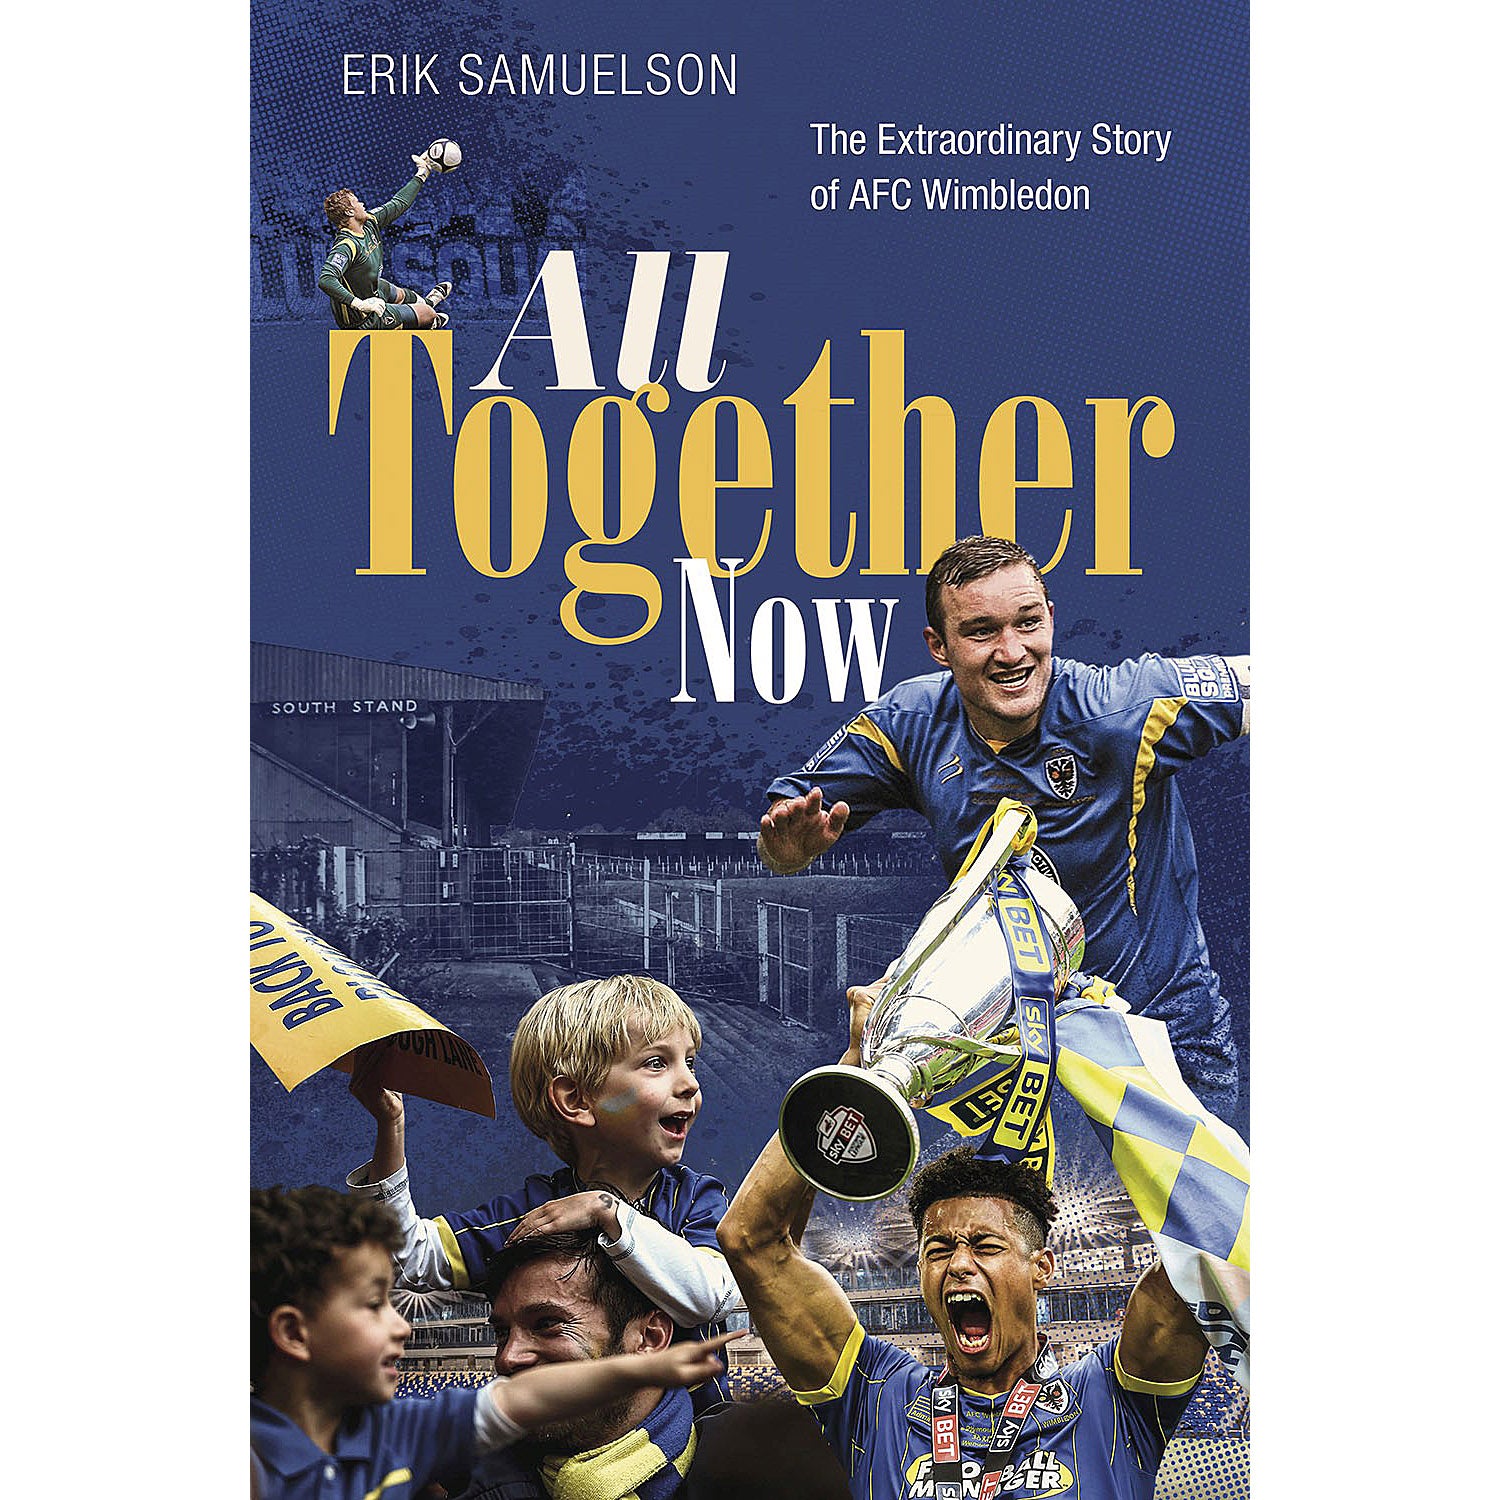 All Together Now – The Extraordinary Story of AFC Wimbledon